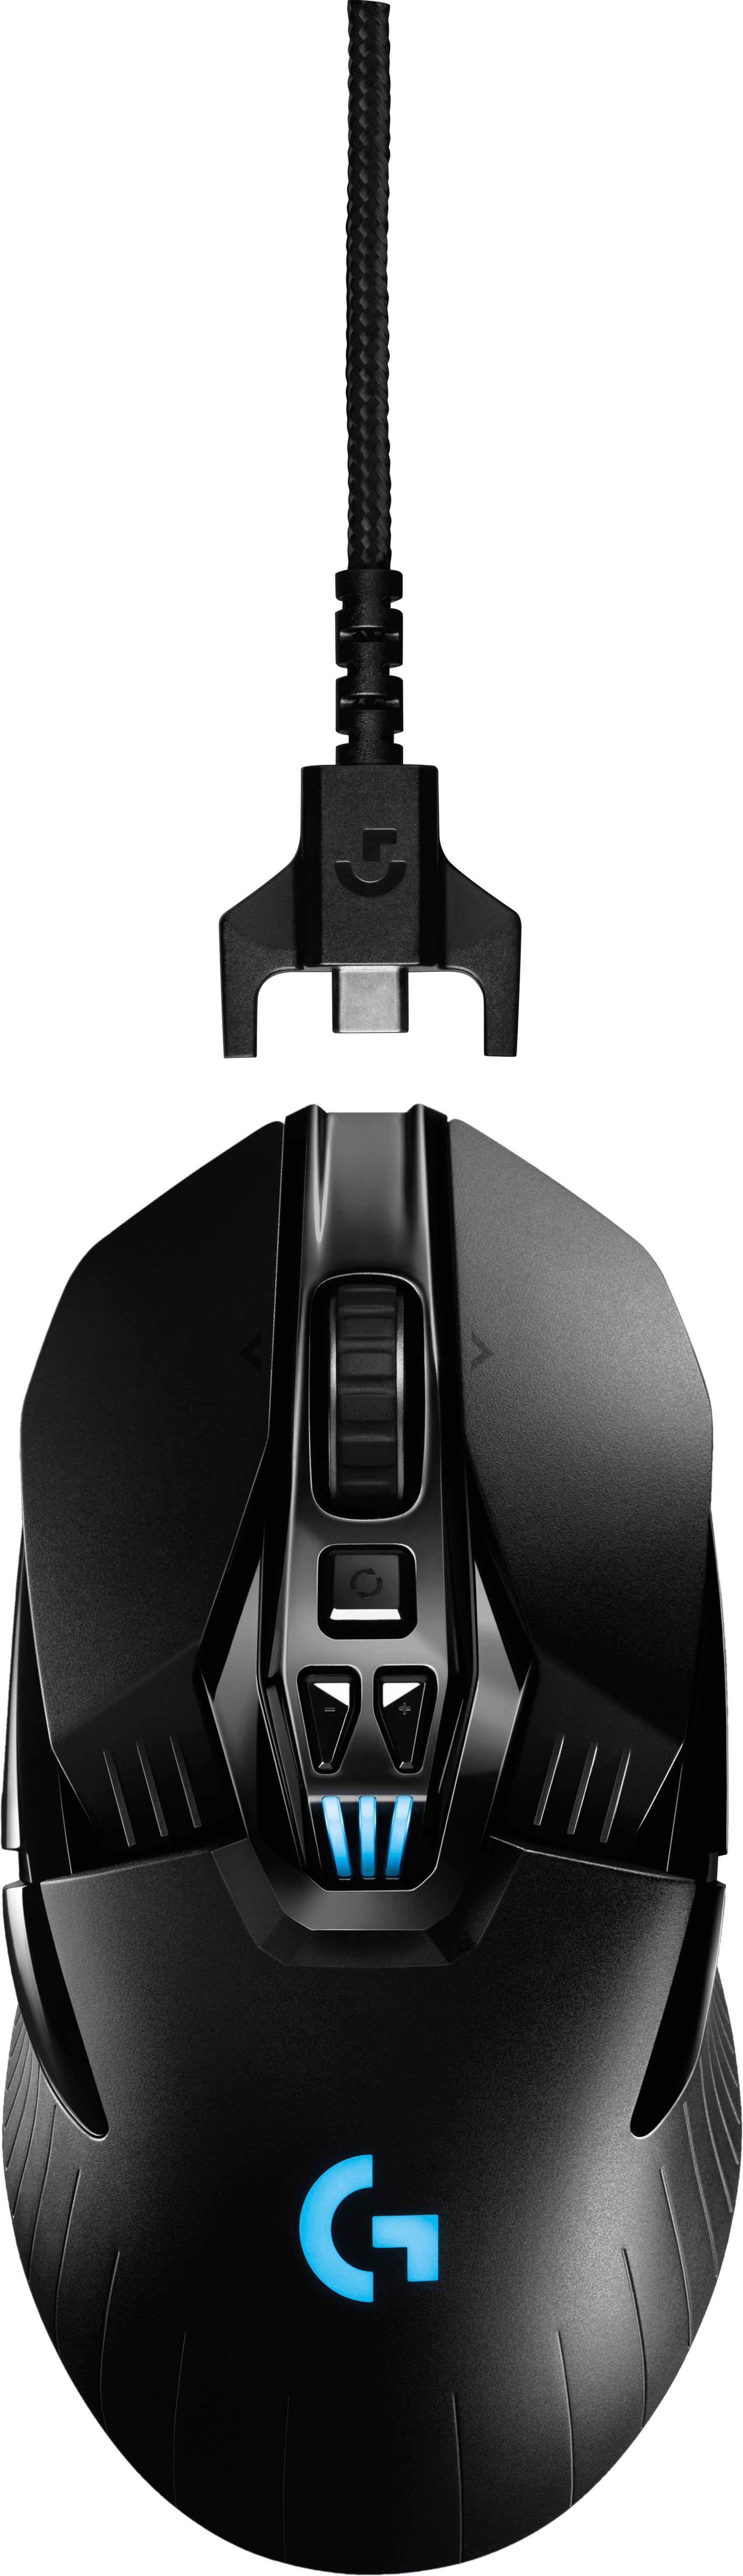 pant koncept Station Logitech G903 LIGHTSPEED Wireless Optical Gaming Ambidextrous Mouse with  RGB Lighting Black 910-005670 - Best Buy